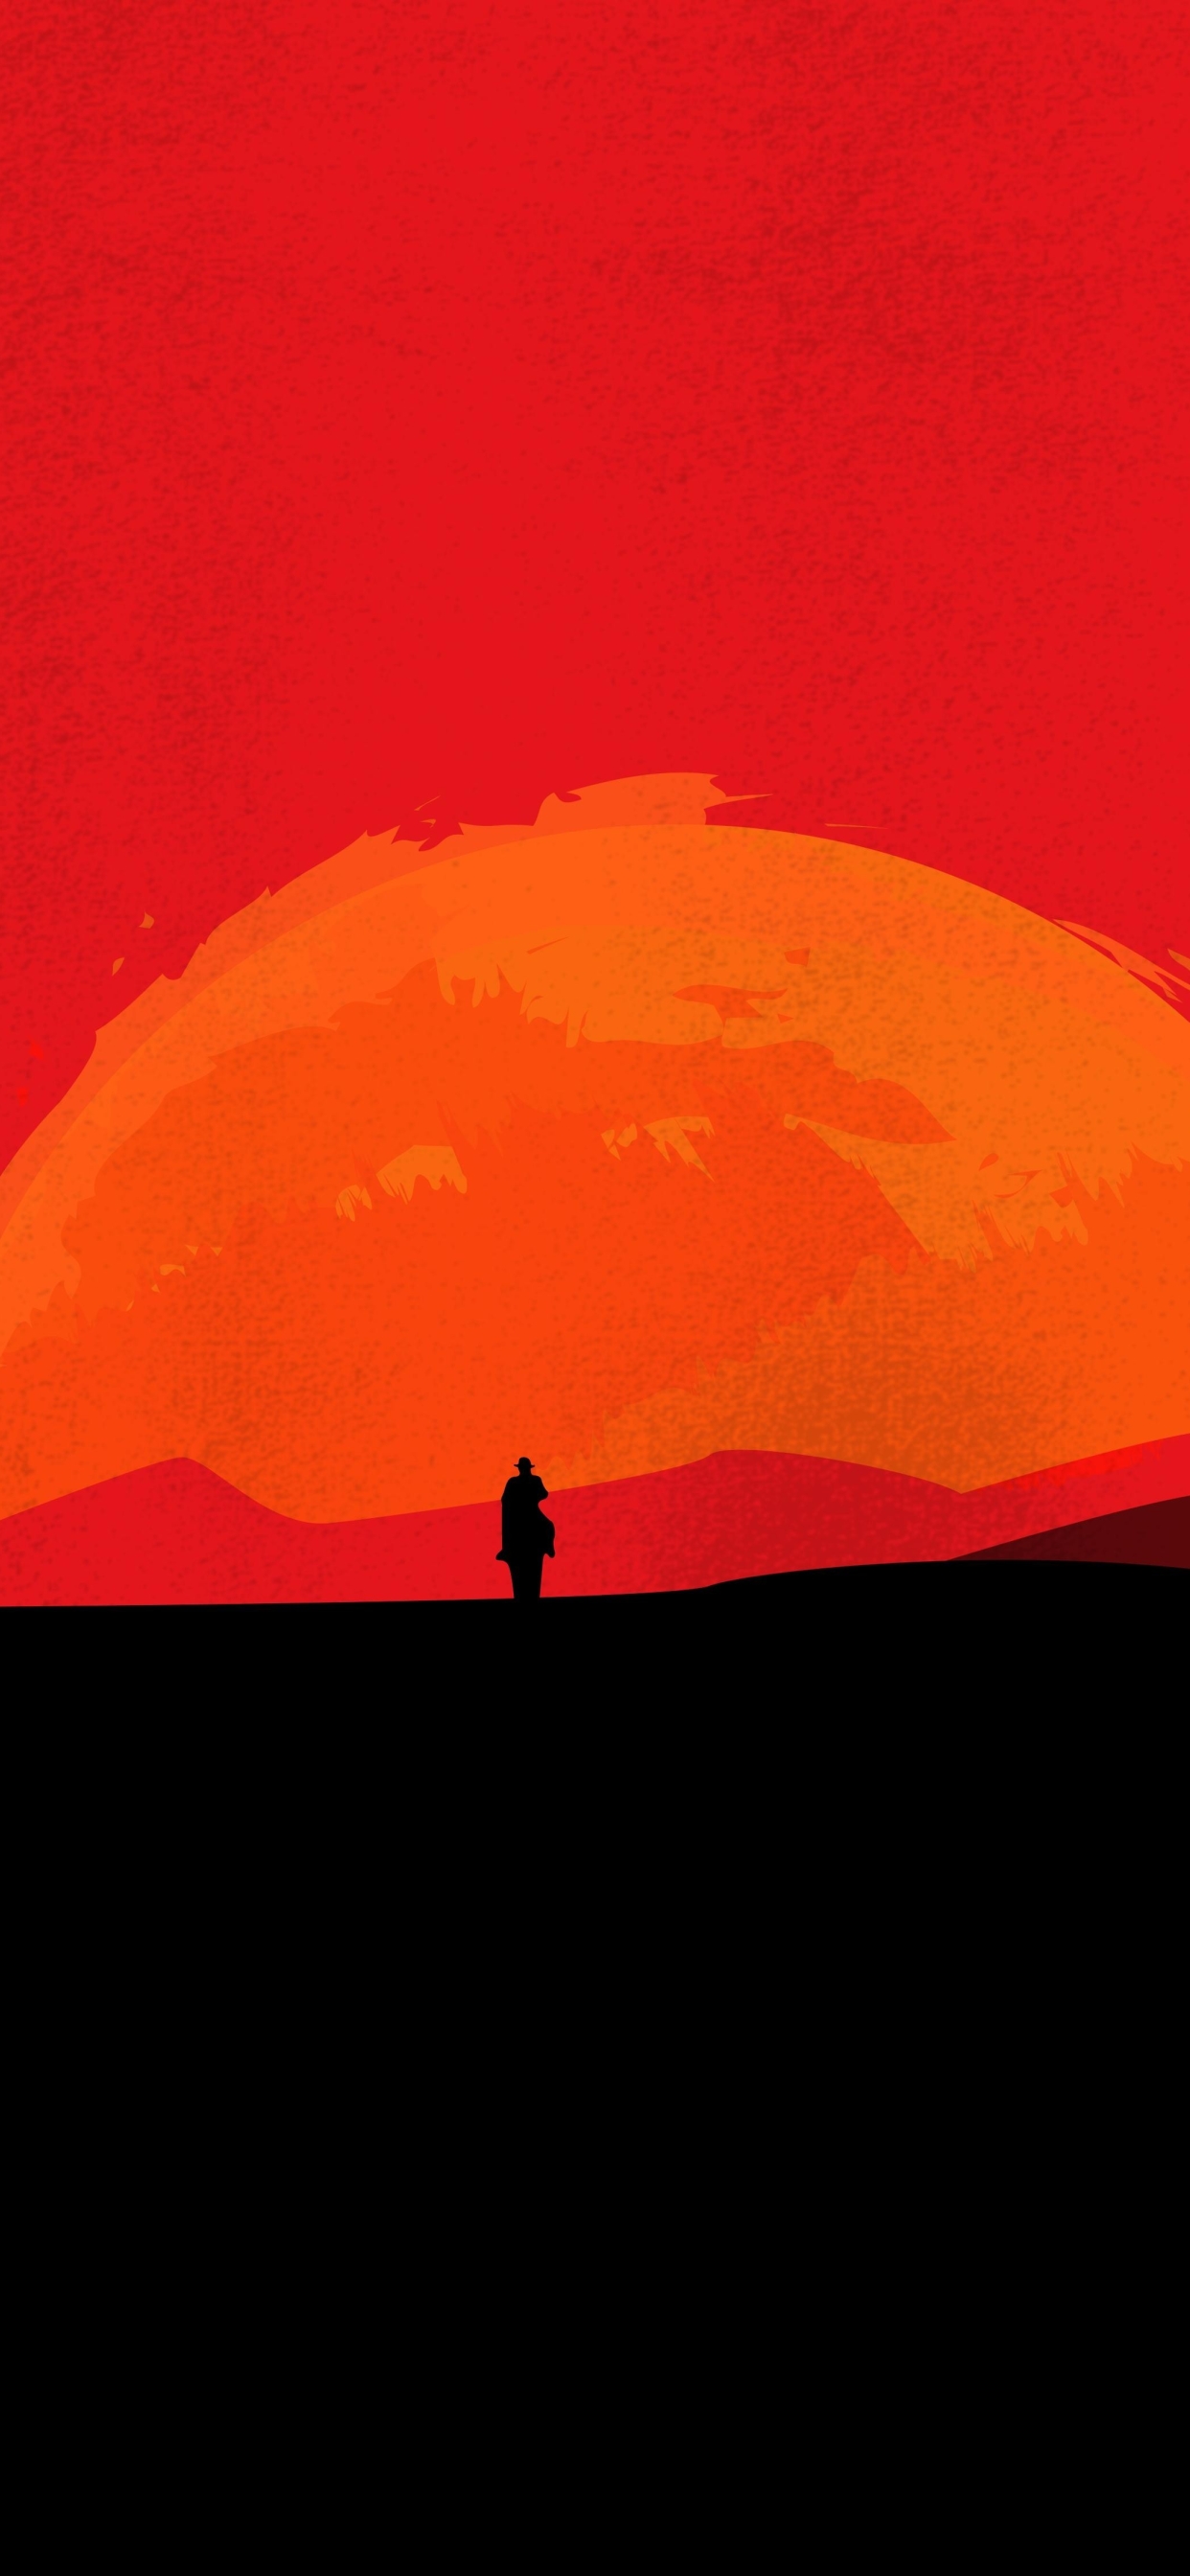 1242x2688 Red Dead Redemption 2 2018 Iphone Xs Max Wallpaper